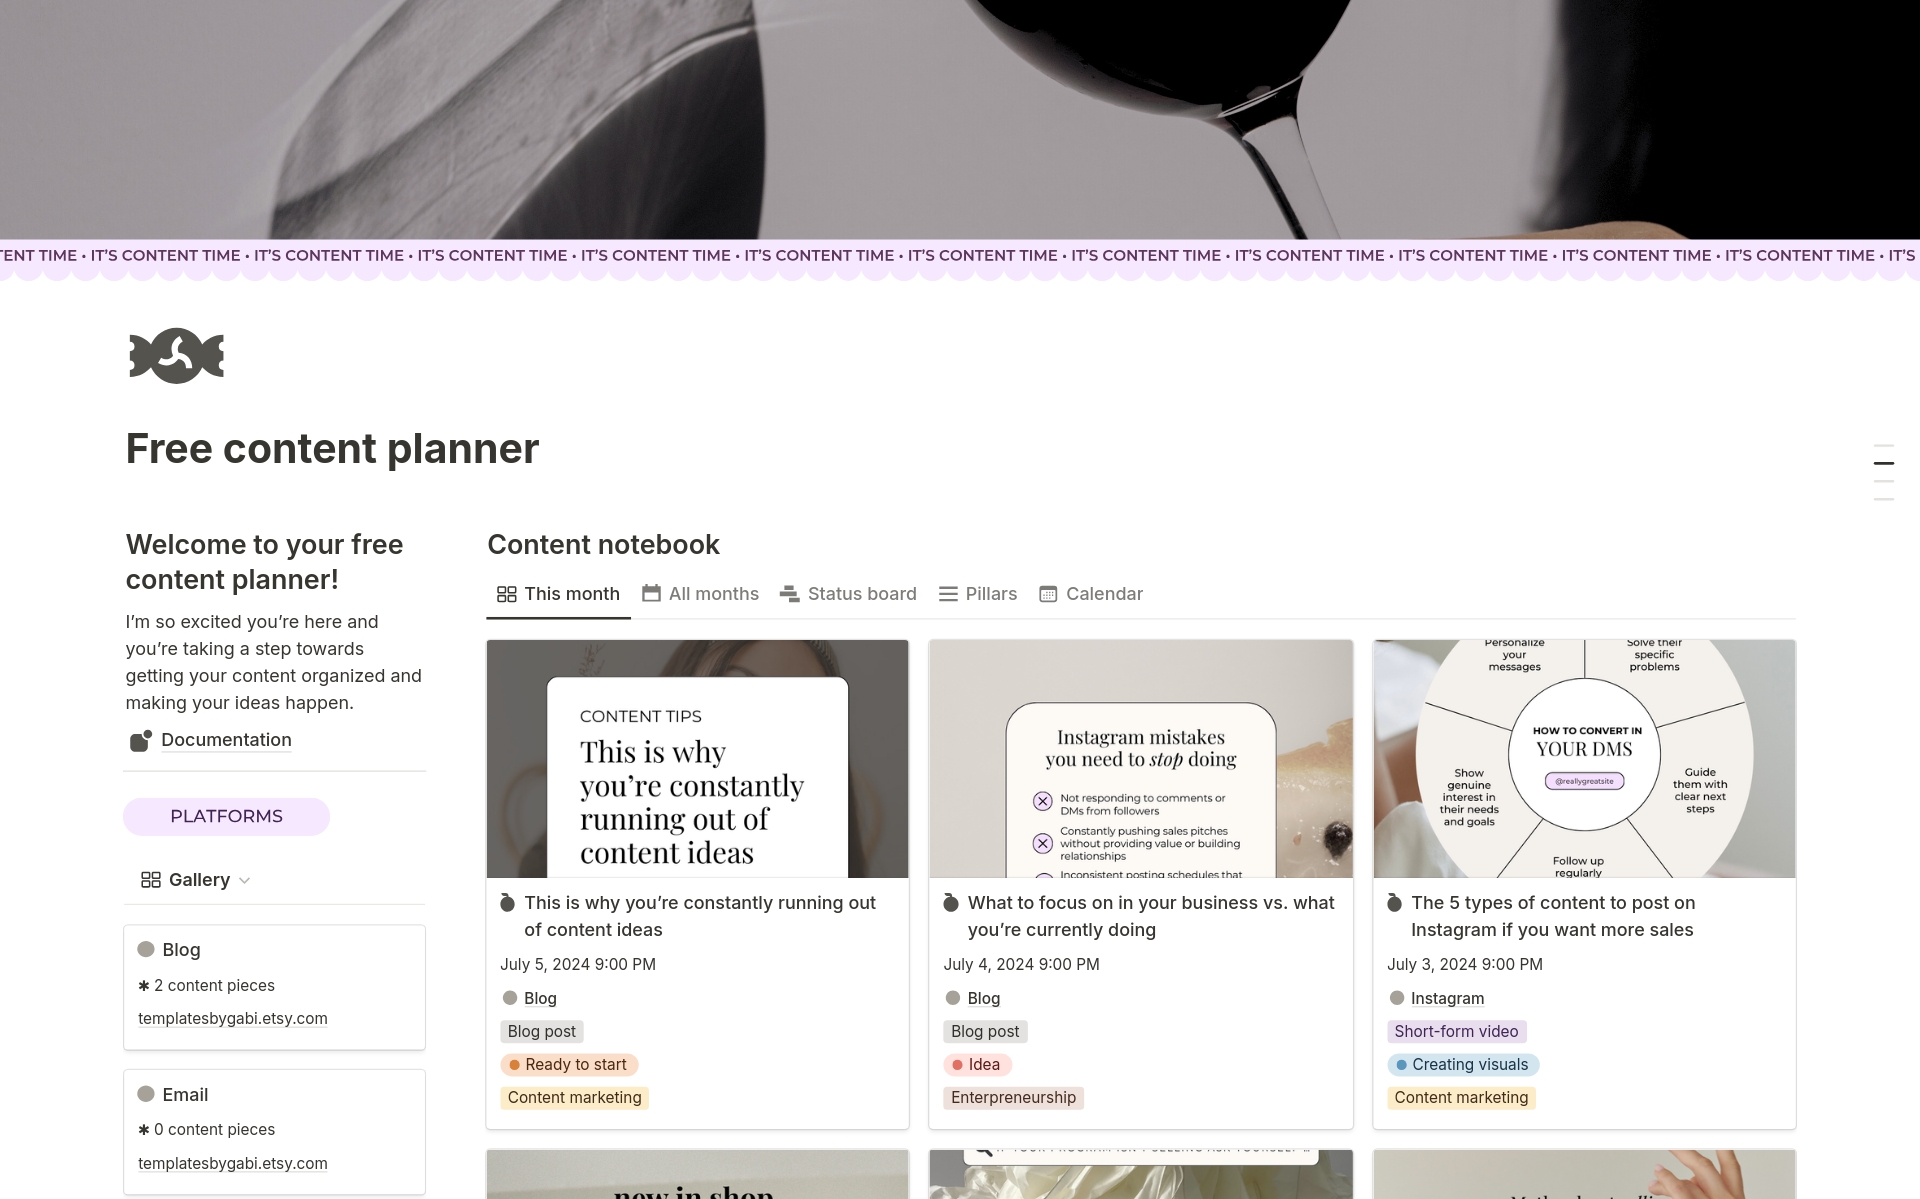 This content planner Notion template is designed to help your streamline your content creation process across multiple social media and long-form content platforms